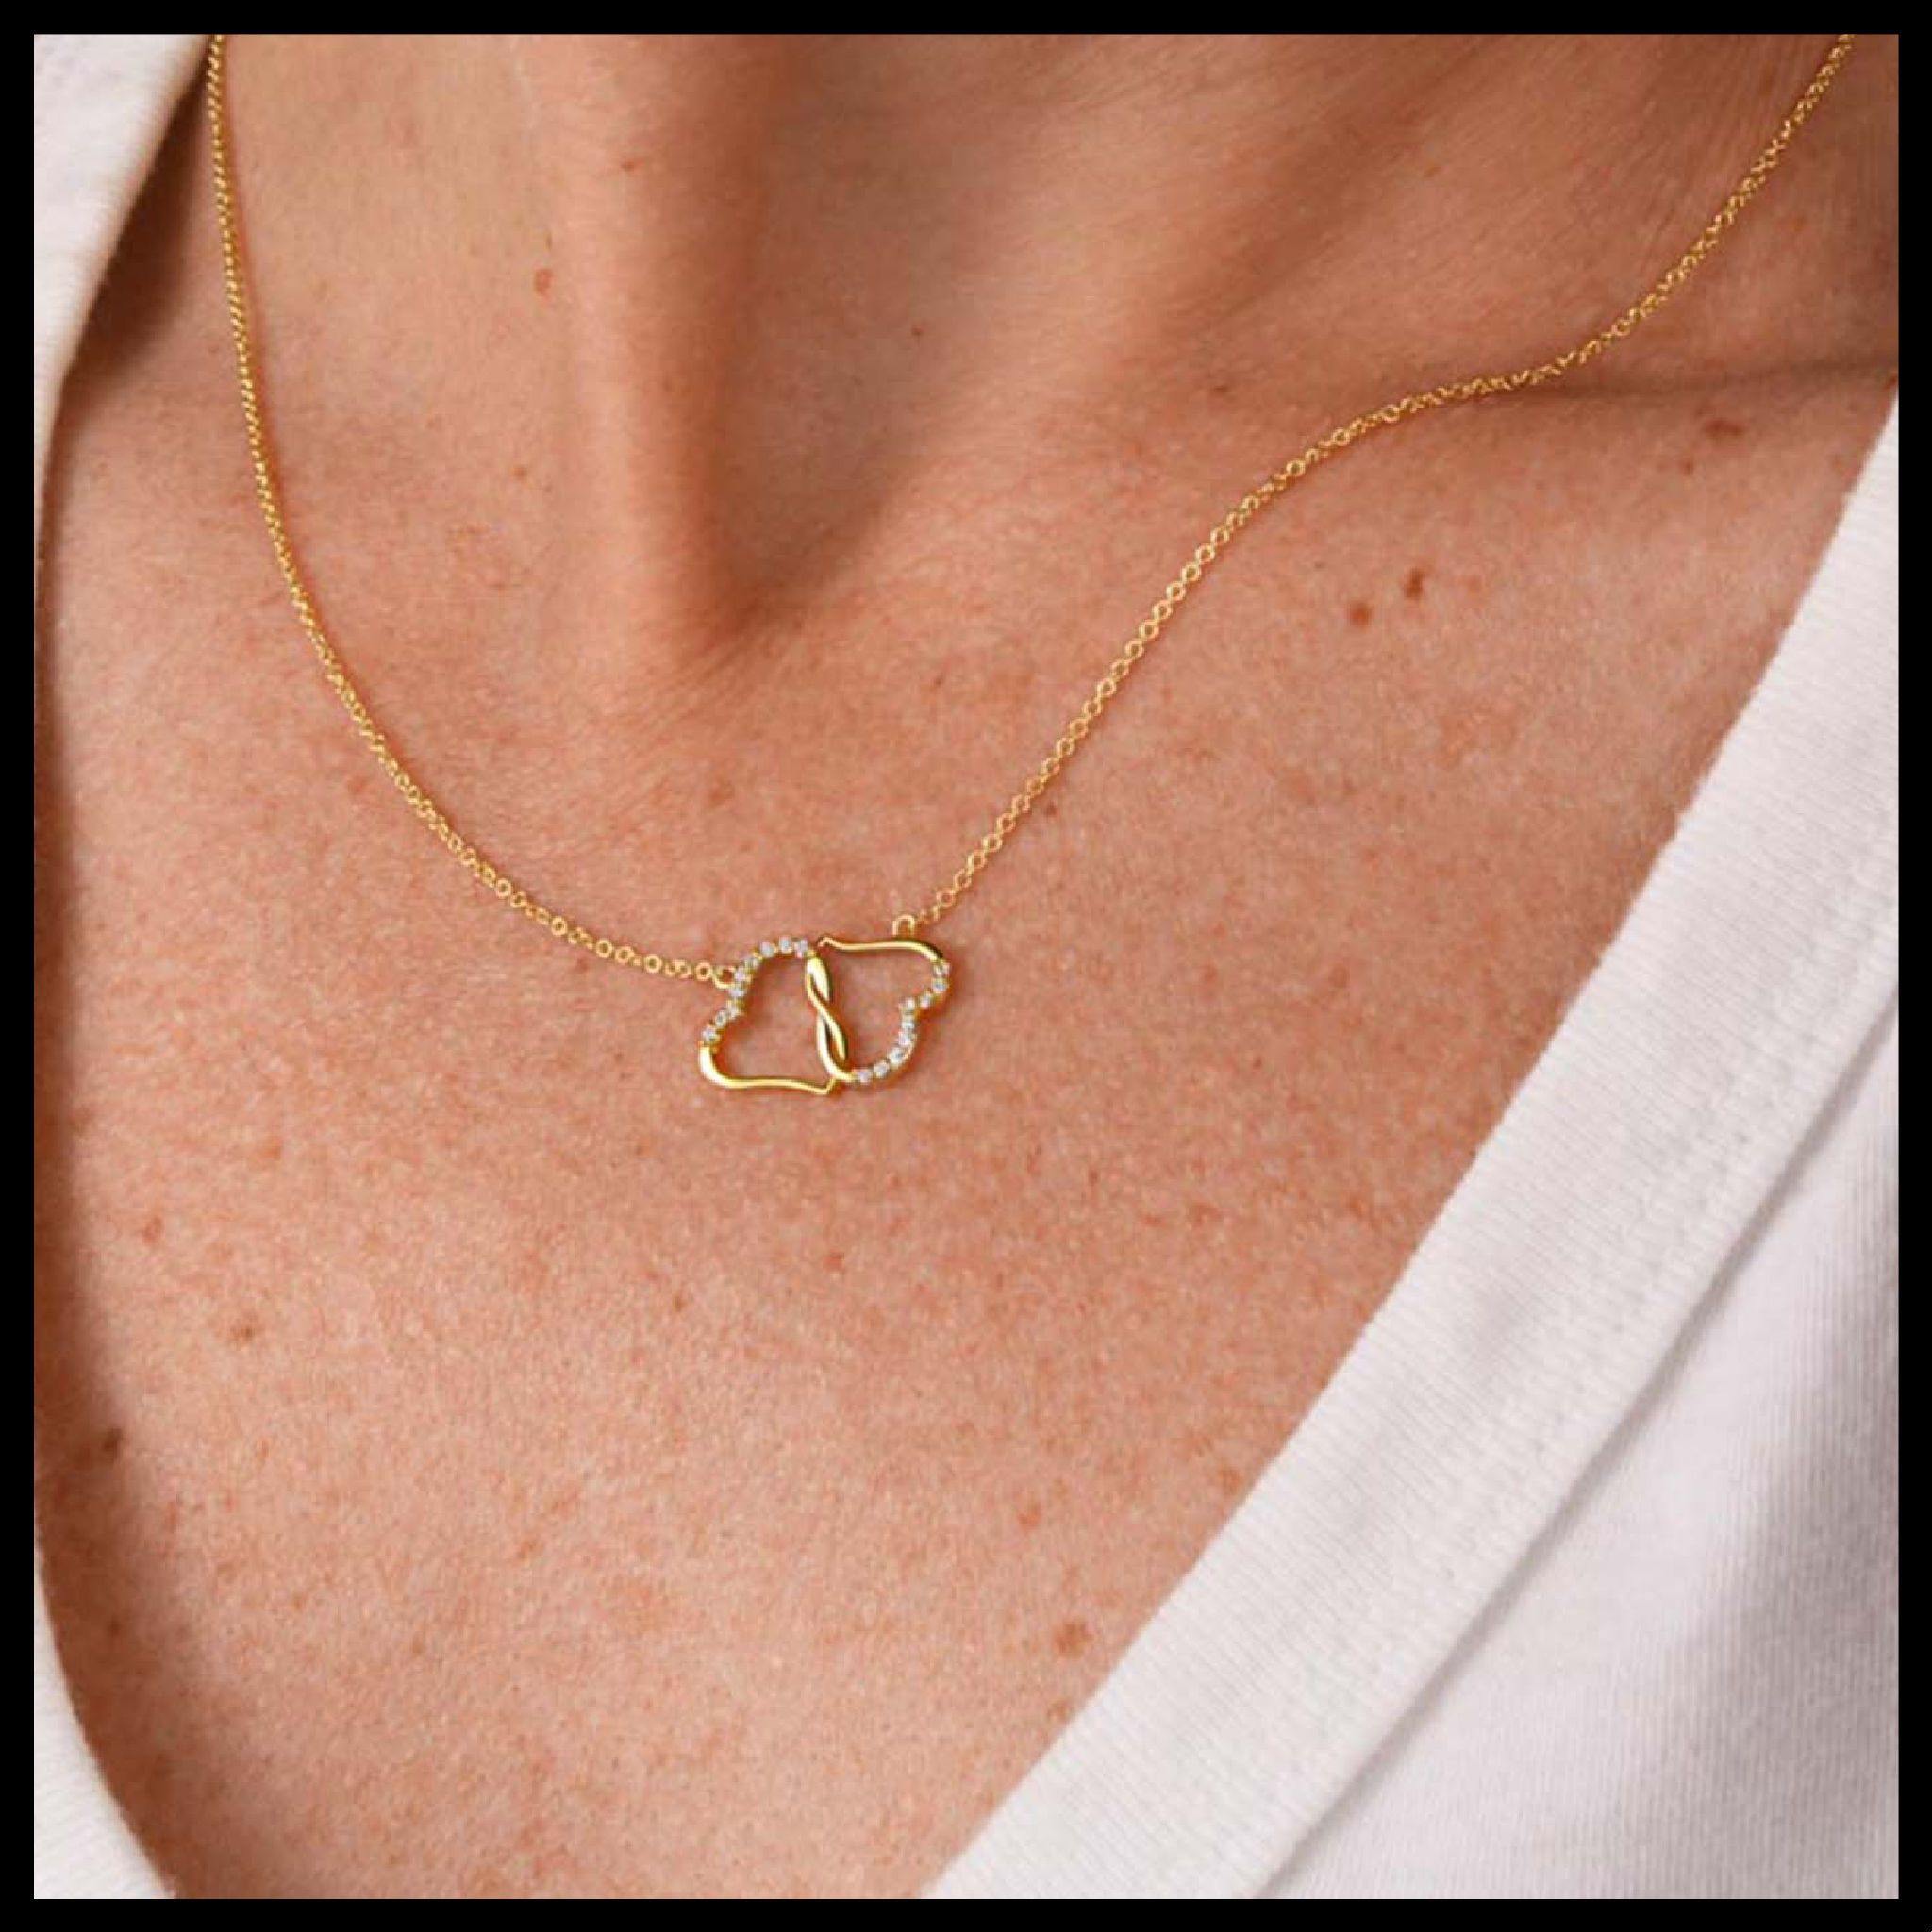 Everlasting Love Necklace | Customly Gifts